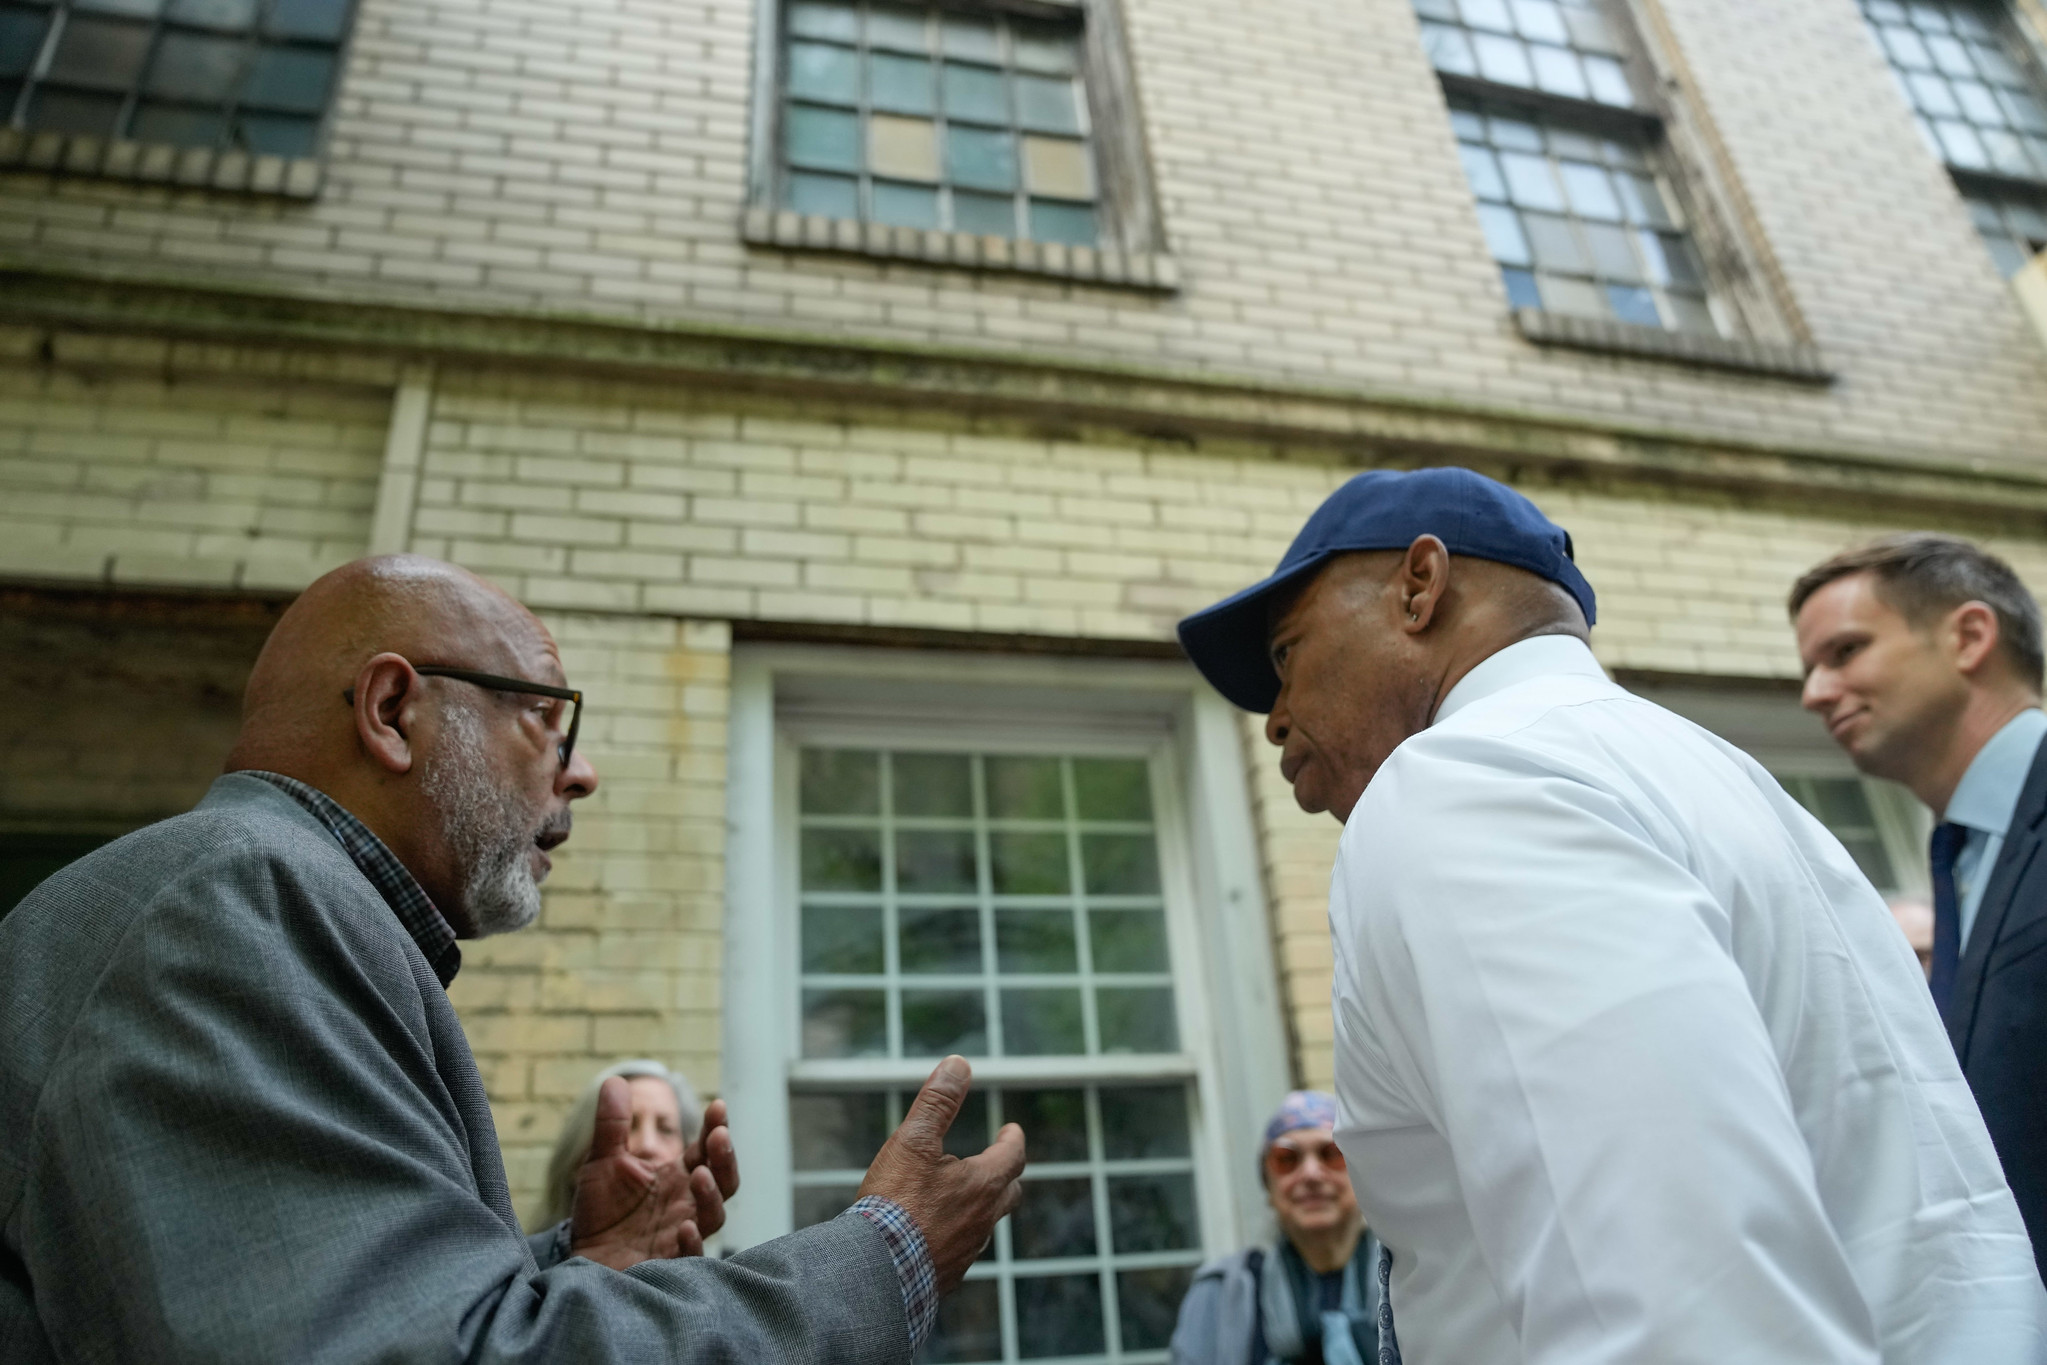 Historian Eric K. Washington, left, chats with New York City Mayor Eric Adams, in the baseball cap, in front of Colored School No. 4 in the city's Chelsea neighborhood just after the building was granted landmark status. Photo credit: Michael Appleton, NYC Mayoral Photography Office